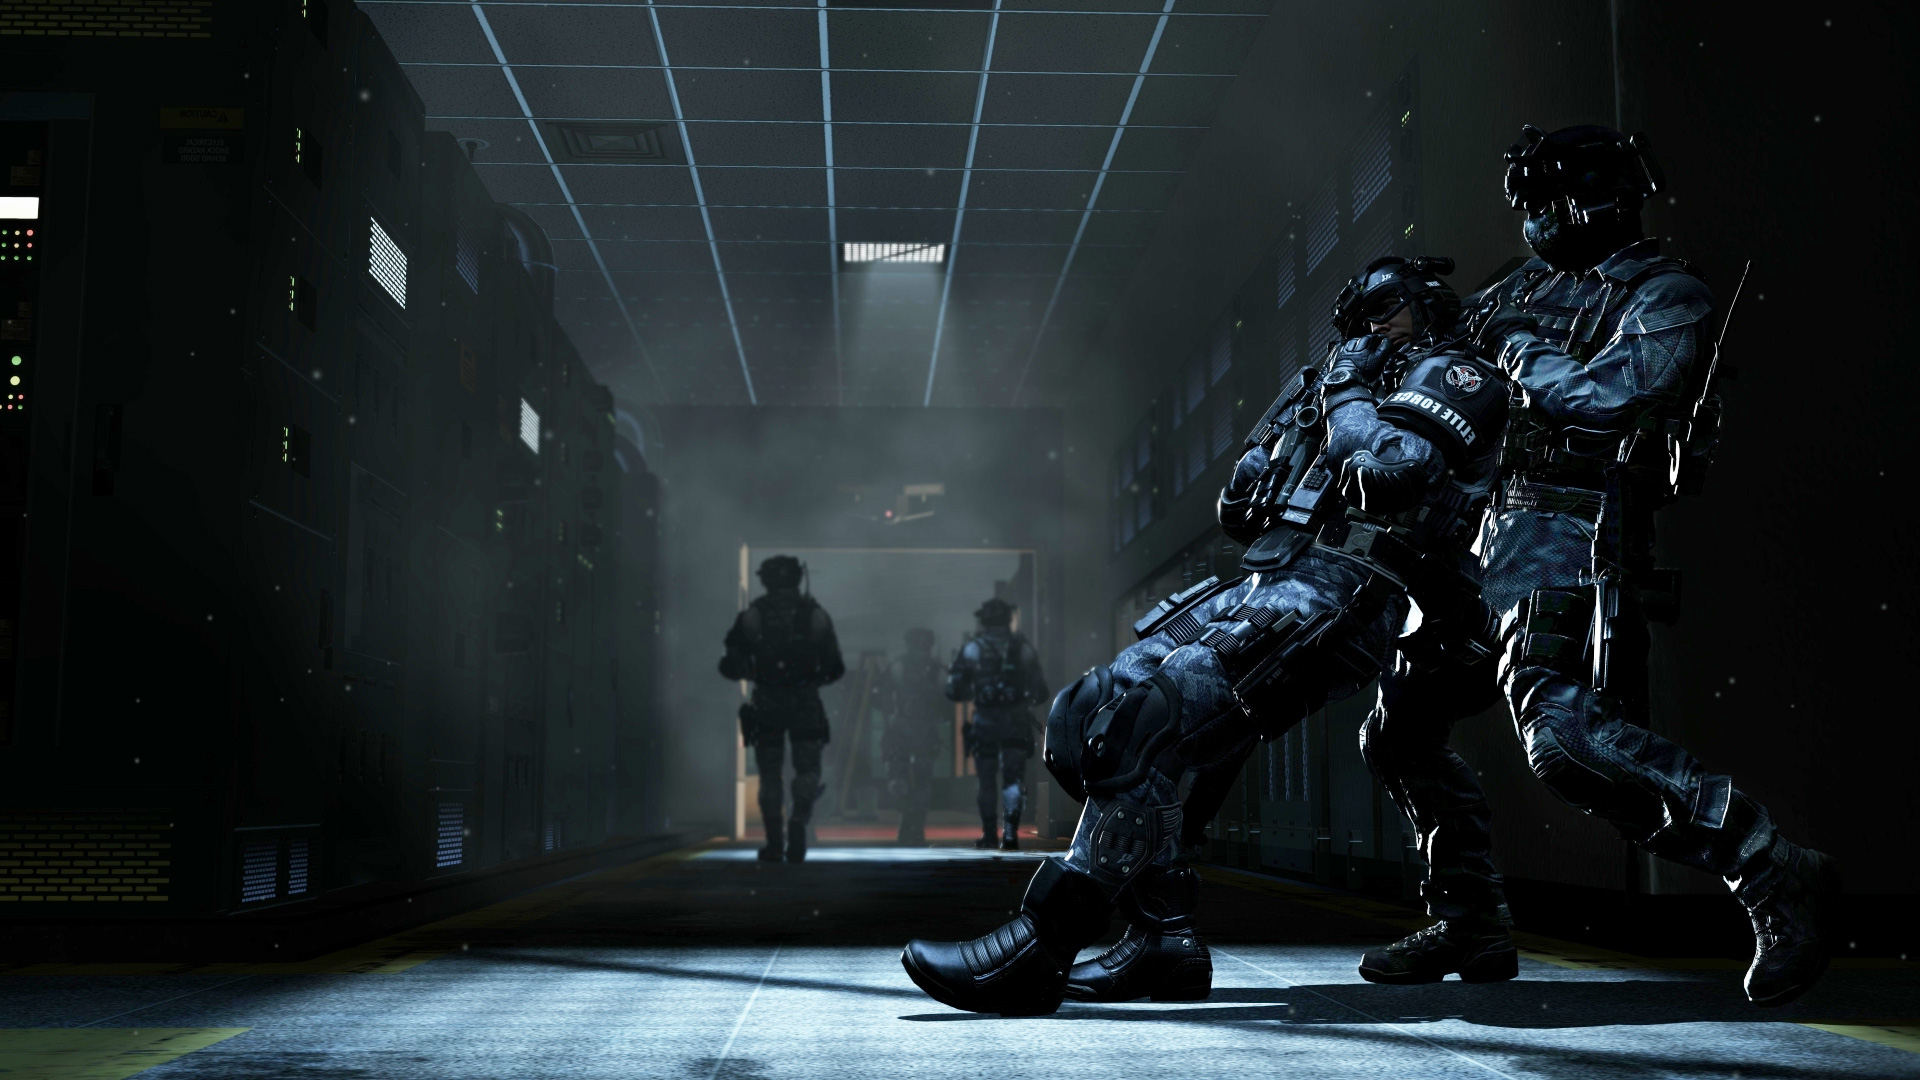 Call of Duty Ghosts Wallpapers 1920x1080 in HD Call of Duty Ghosts